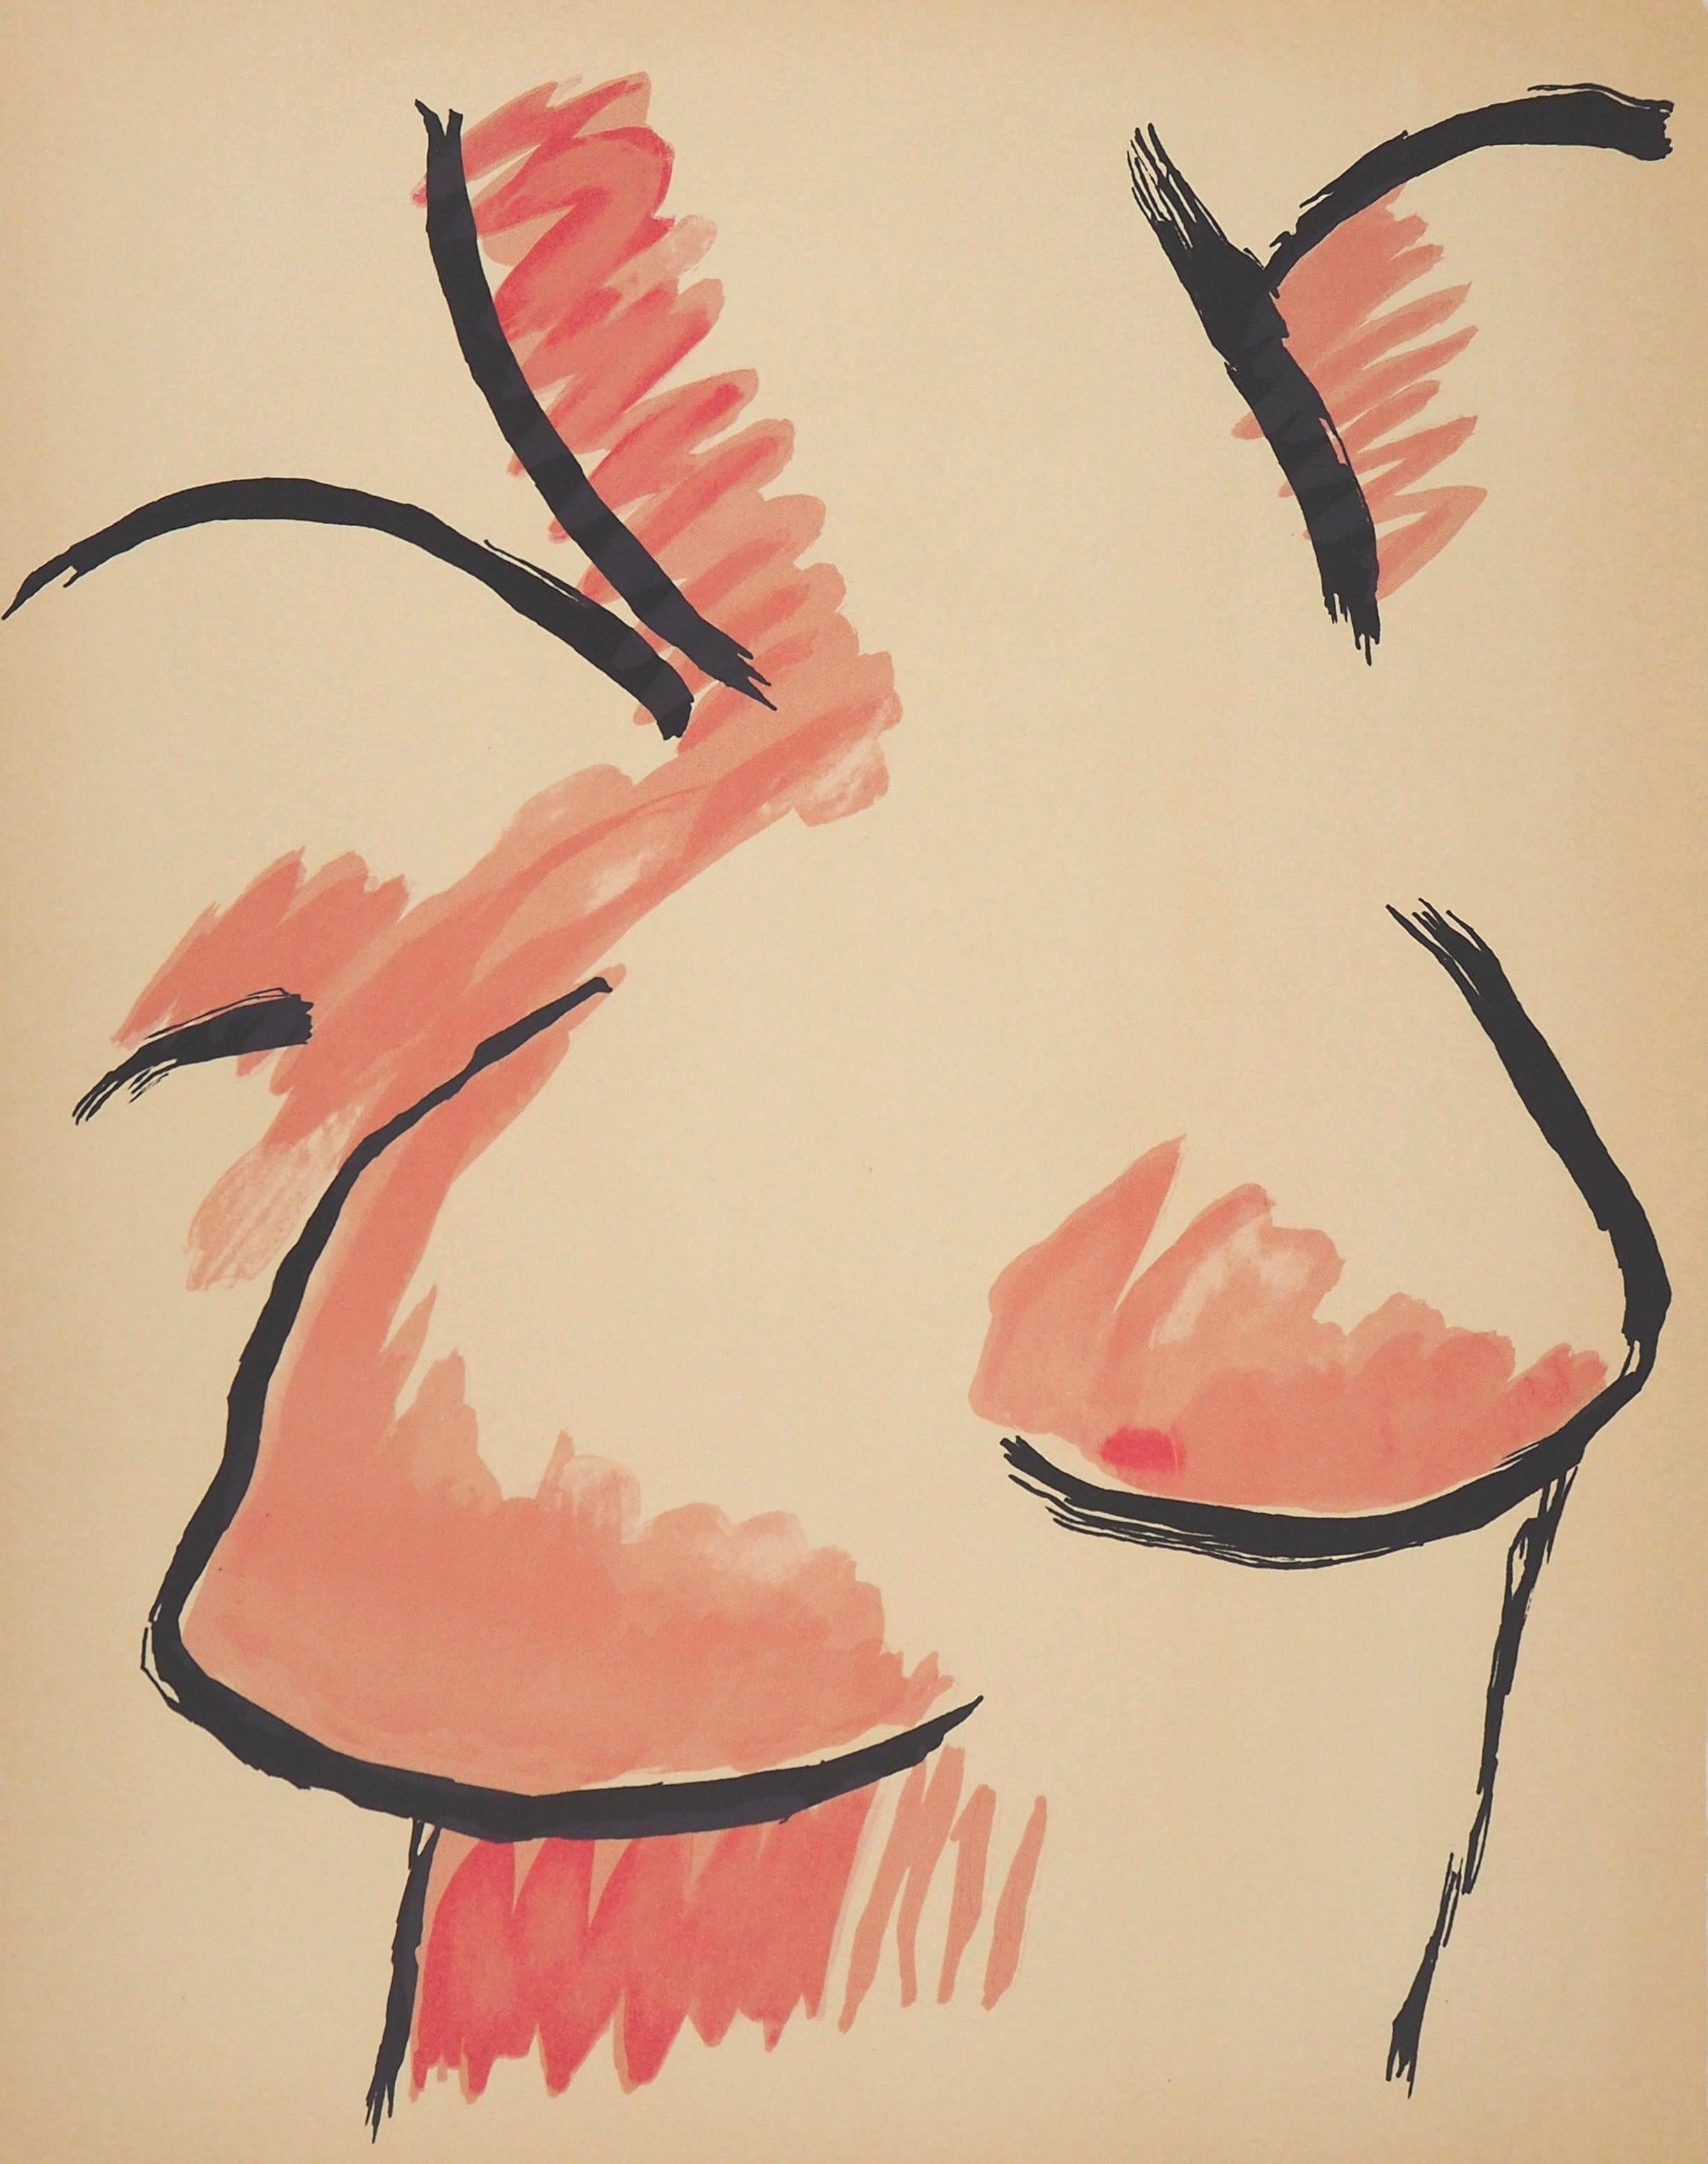 Woman Bust - Handsigned Original Lithograph - Surrealist Print by Man Ray